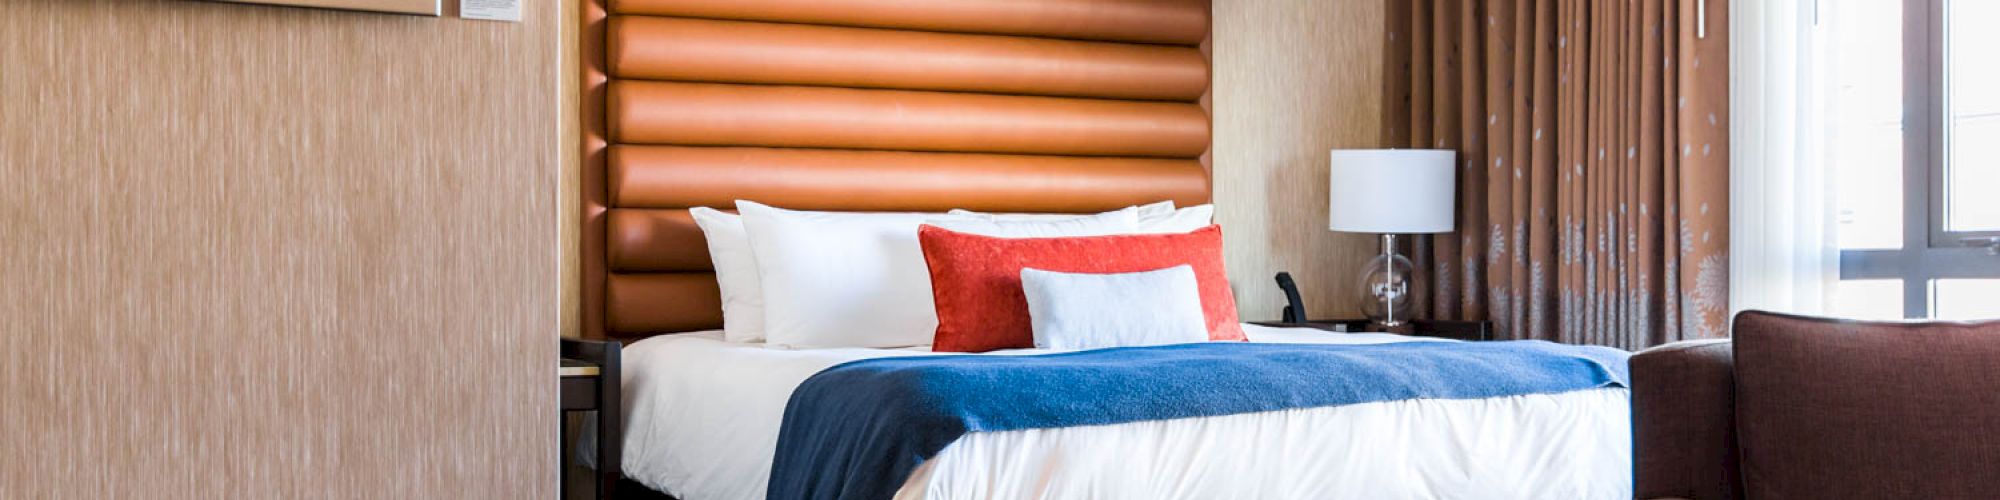 A modern hotel room features a large bed with blue and red accents, a window with brown curtains, a lamp, and a comfortable seating area.